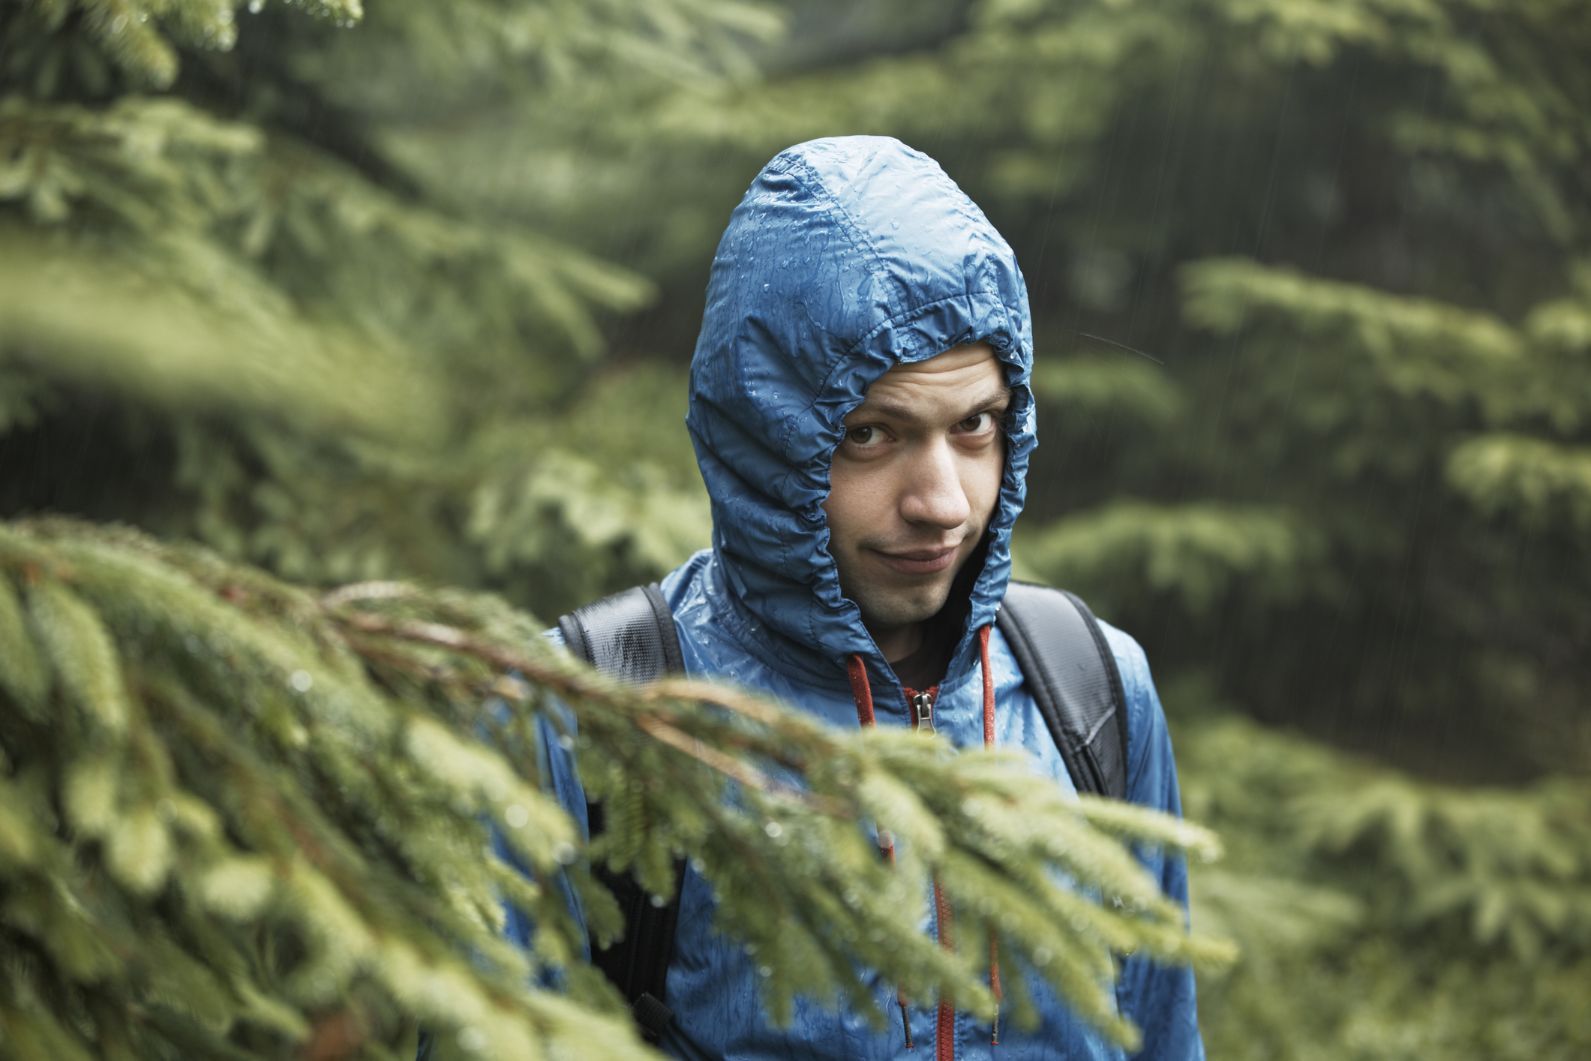 A newbie hiker with a raincoat looking slightly unhappy.